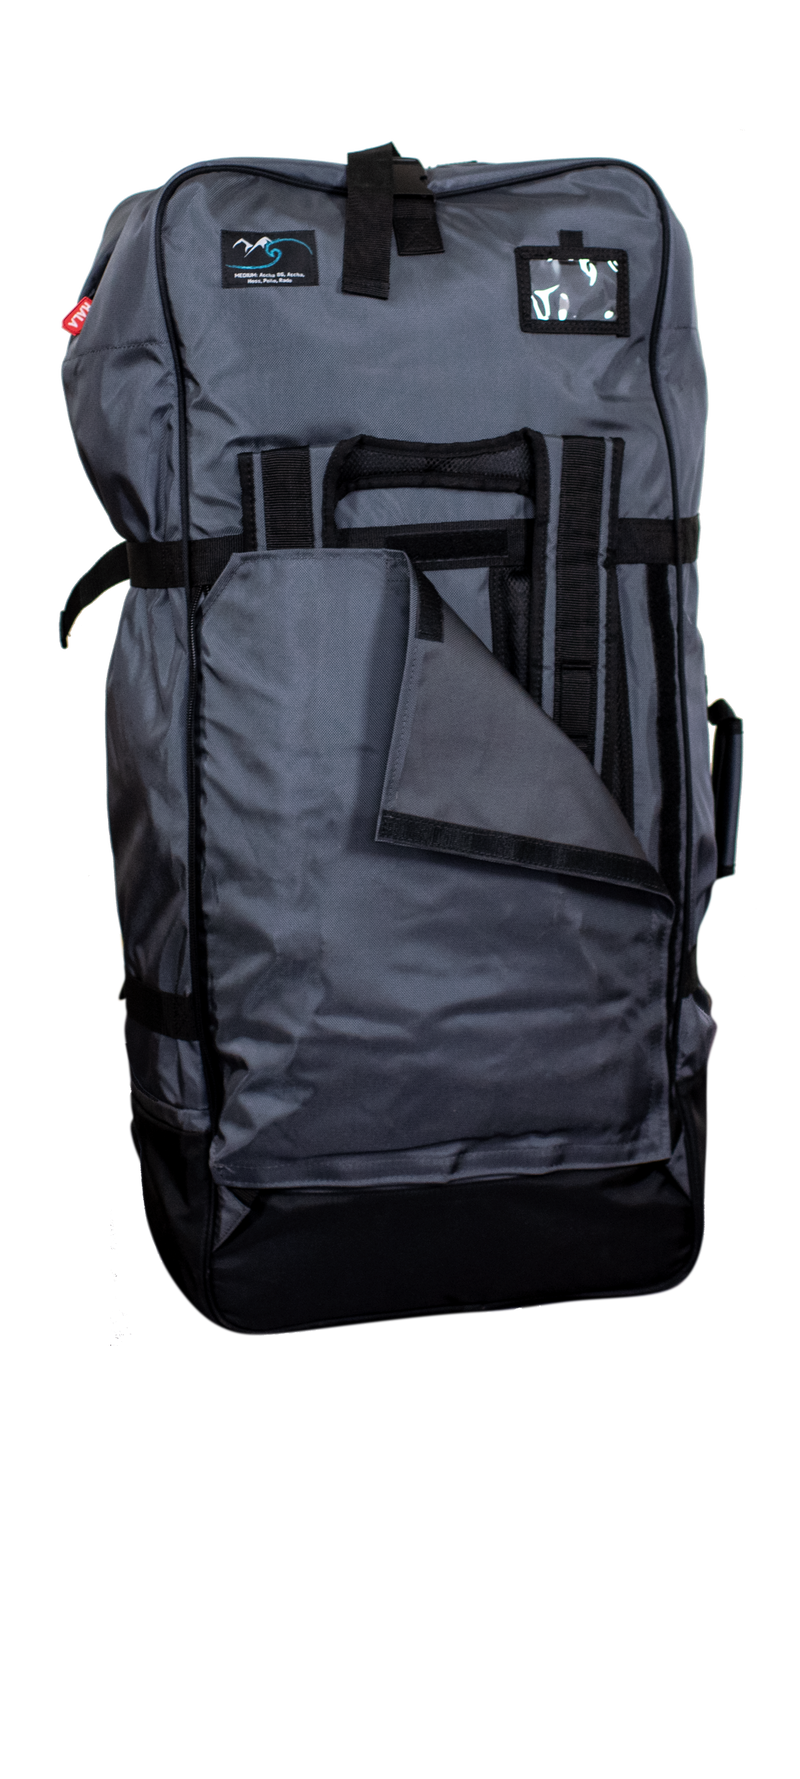 Backcountry Rolling Backpack